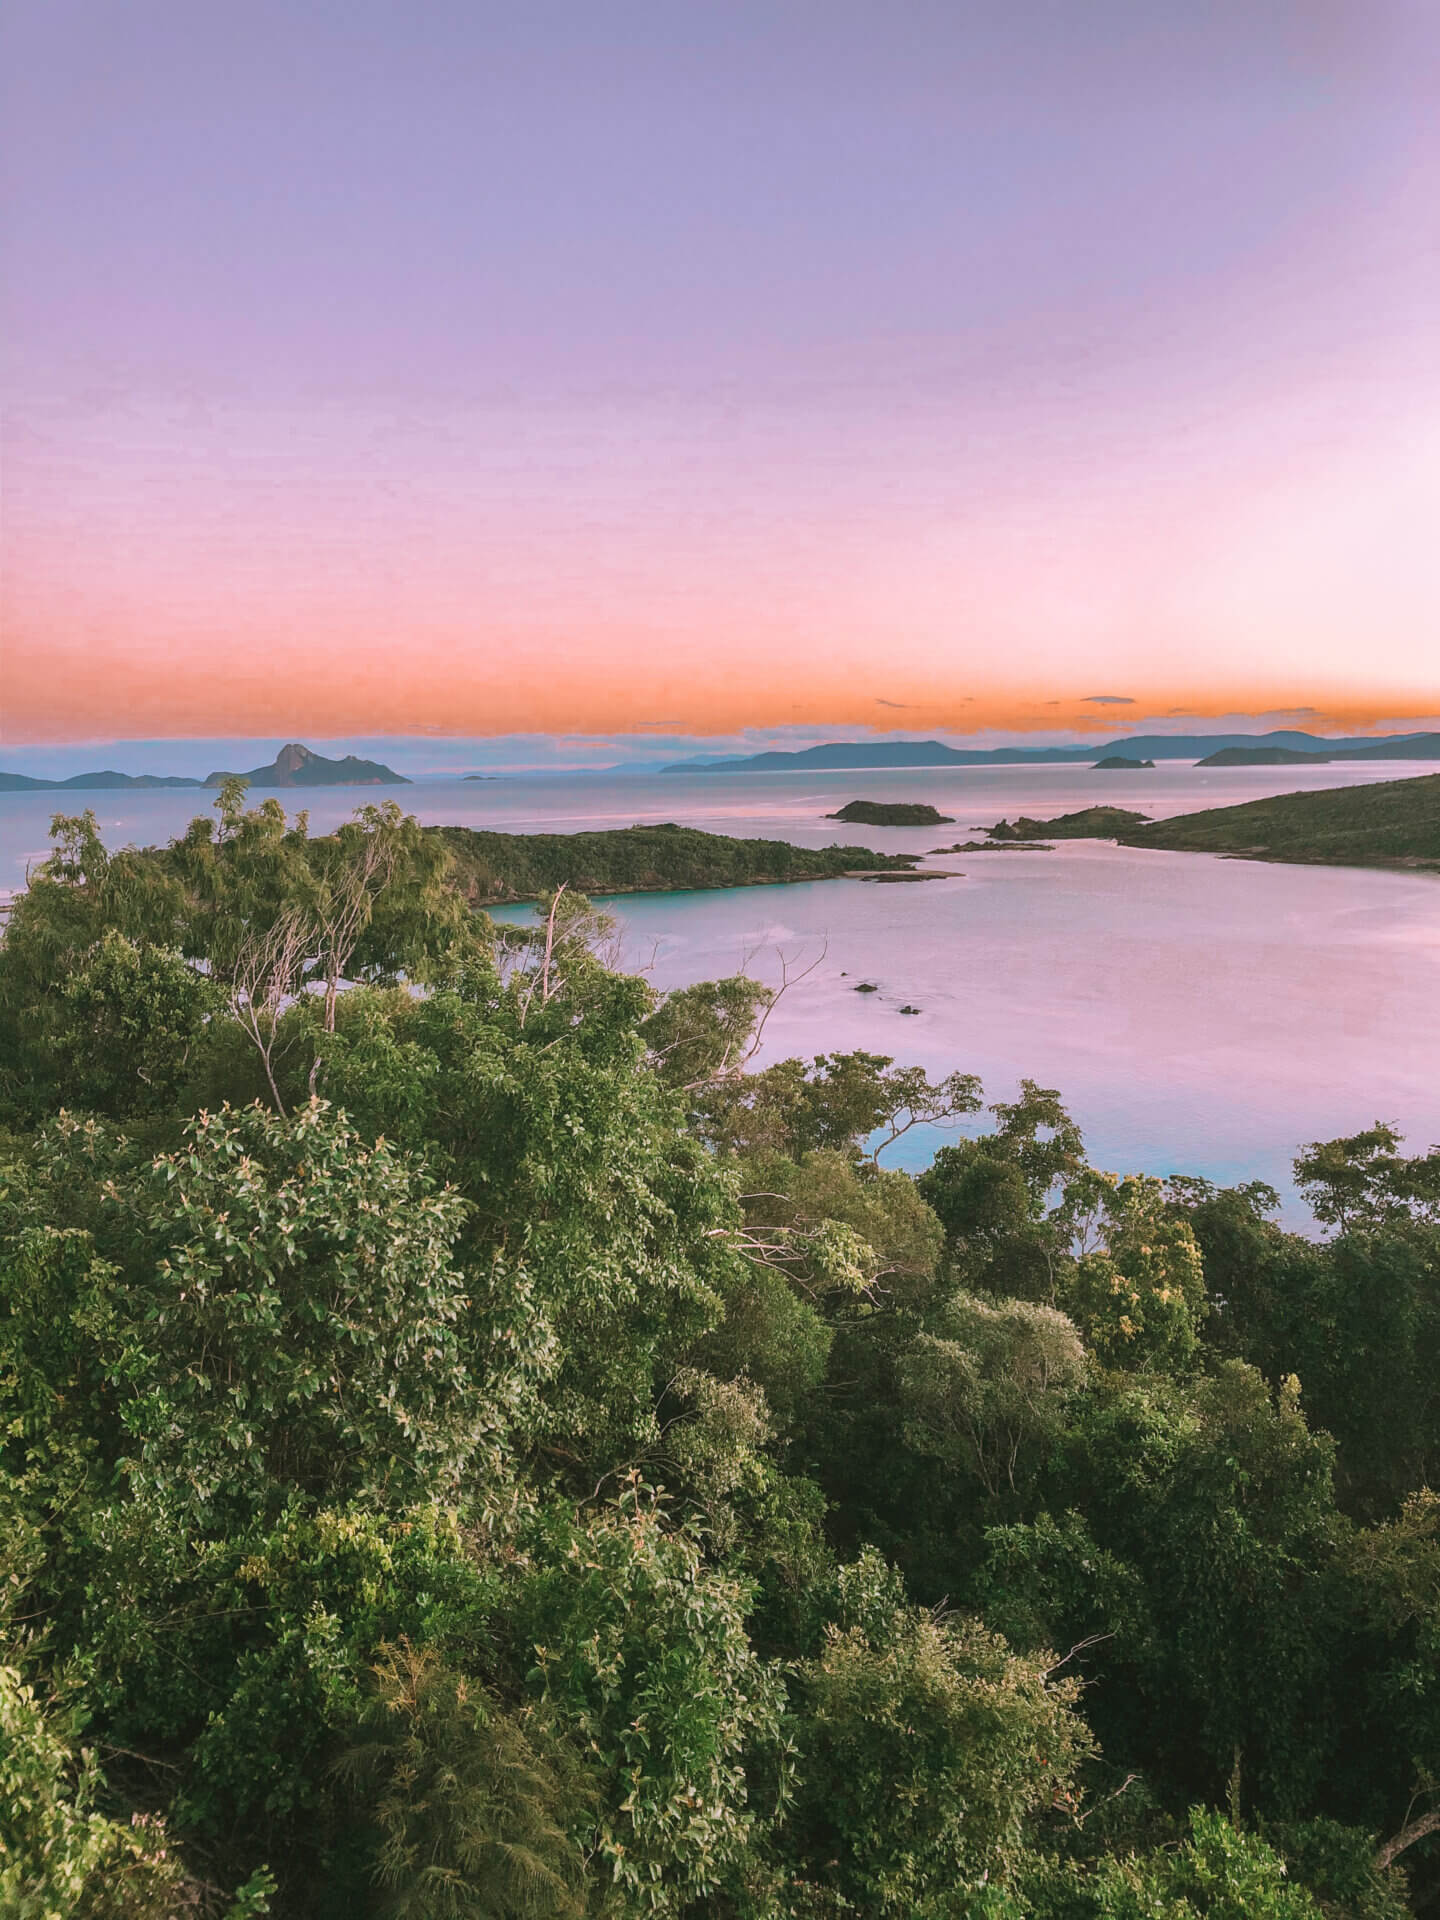 A beautiful sunset over the Whitsundays at the Whitsunday Lookout